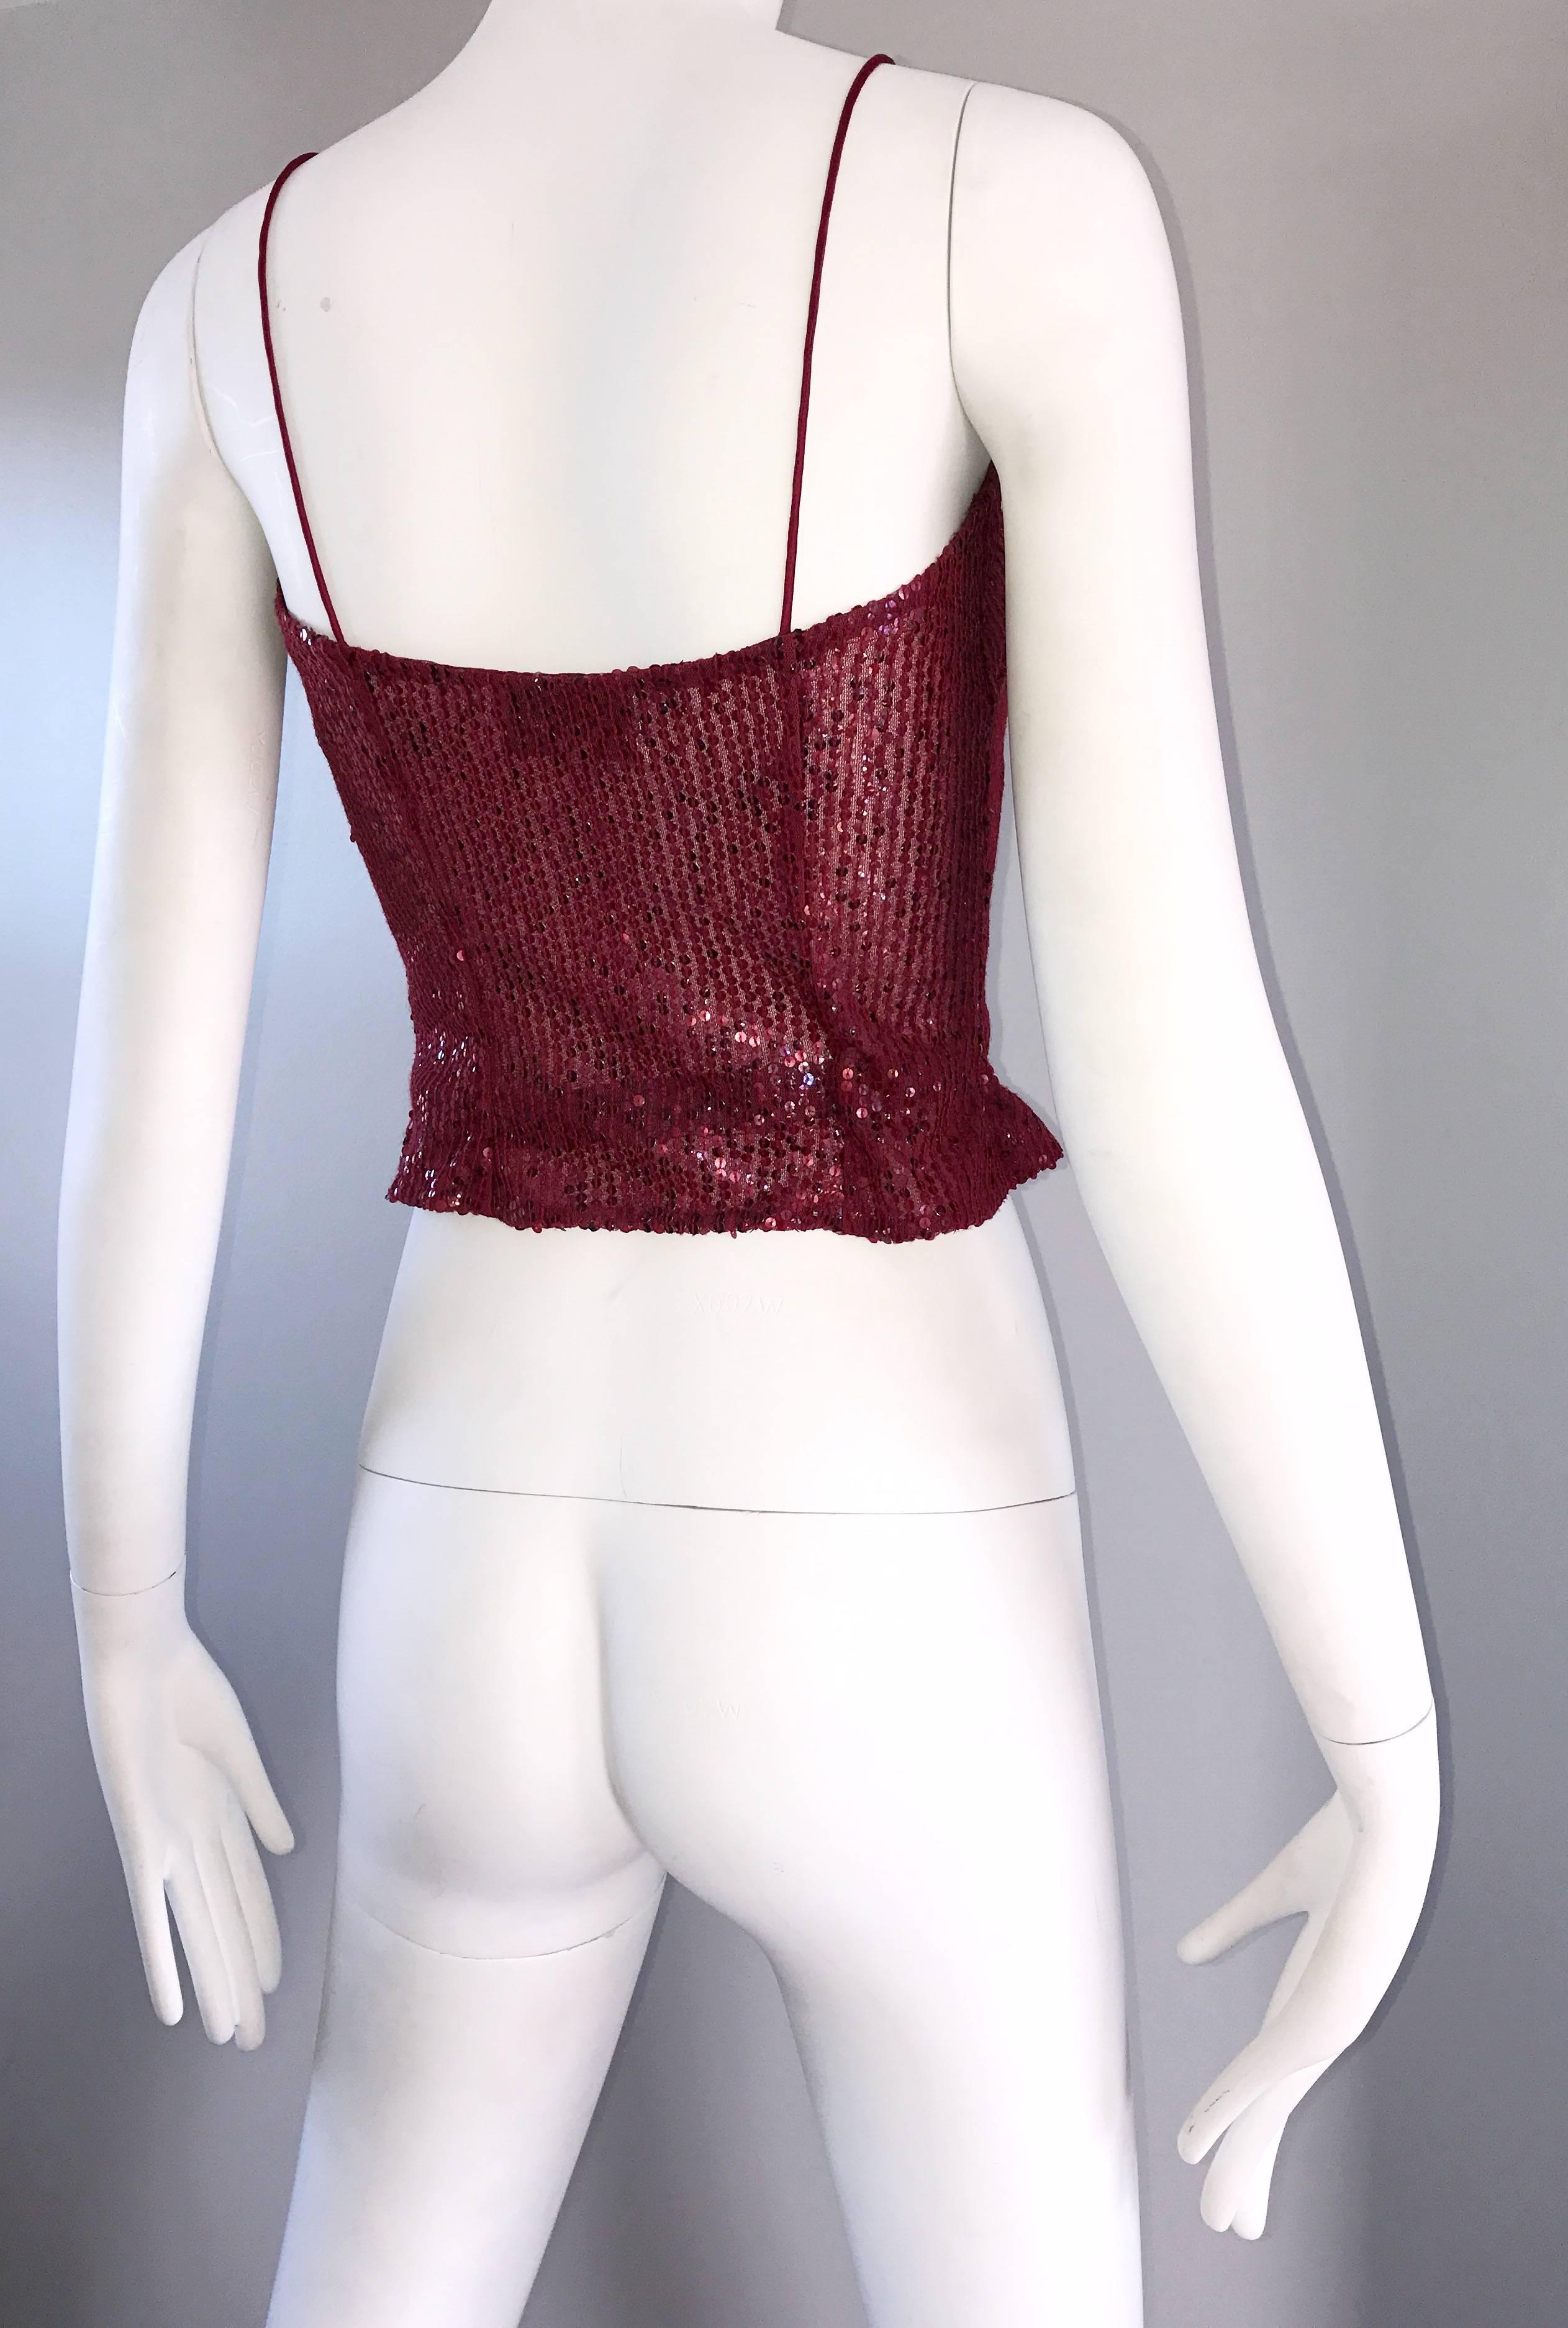 Vintage Liancarlo 1990s Red Wine Colored Fully Sequined Silk 90s Top Blouse 1